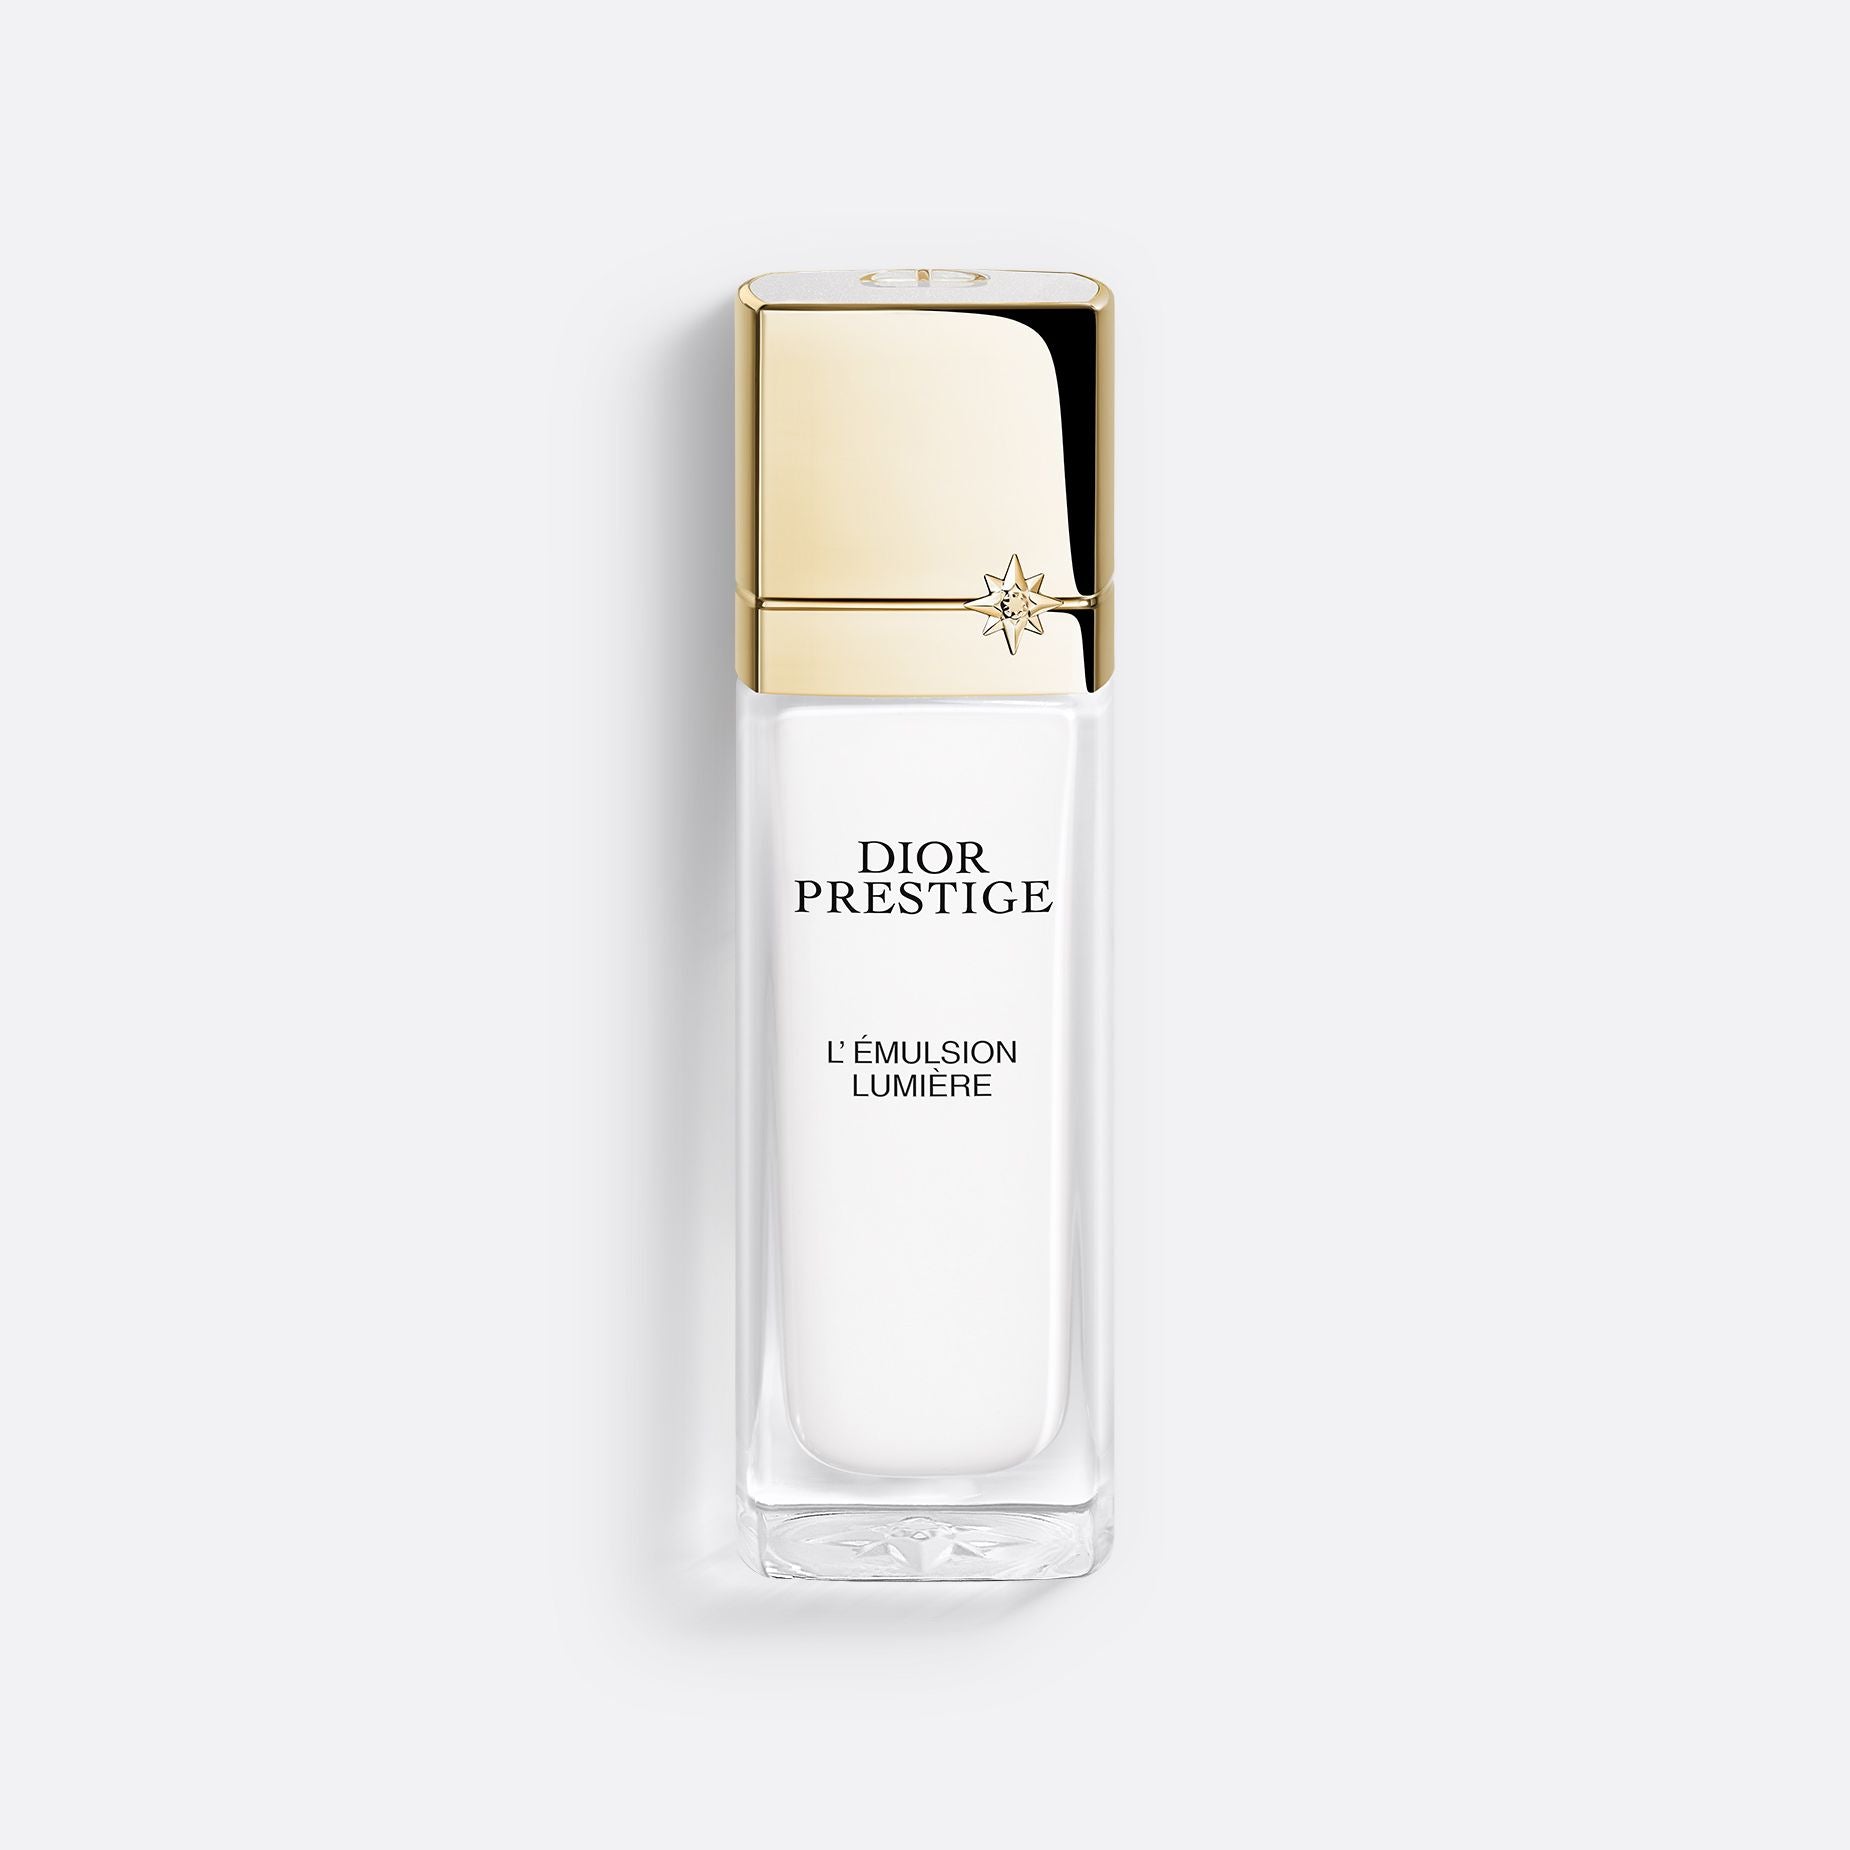 DIOR PRESTIGE L'ÉMULSION LUMIÈRE ~ Brightening and Revitalizing Skincare - Hydrates, Revitalizes and Evens Out the Skin